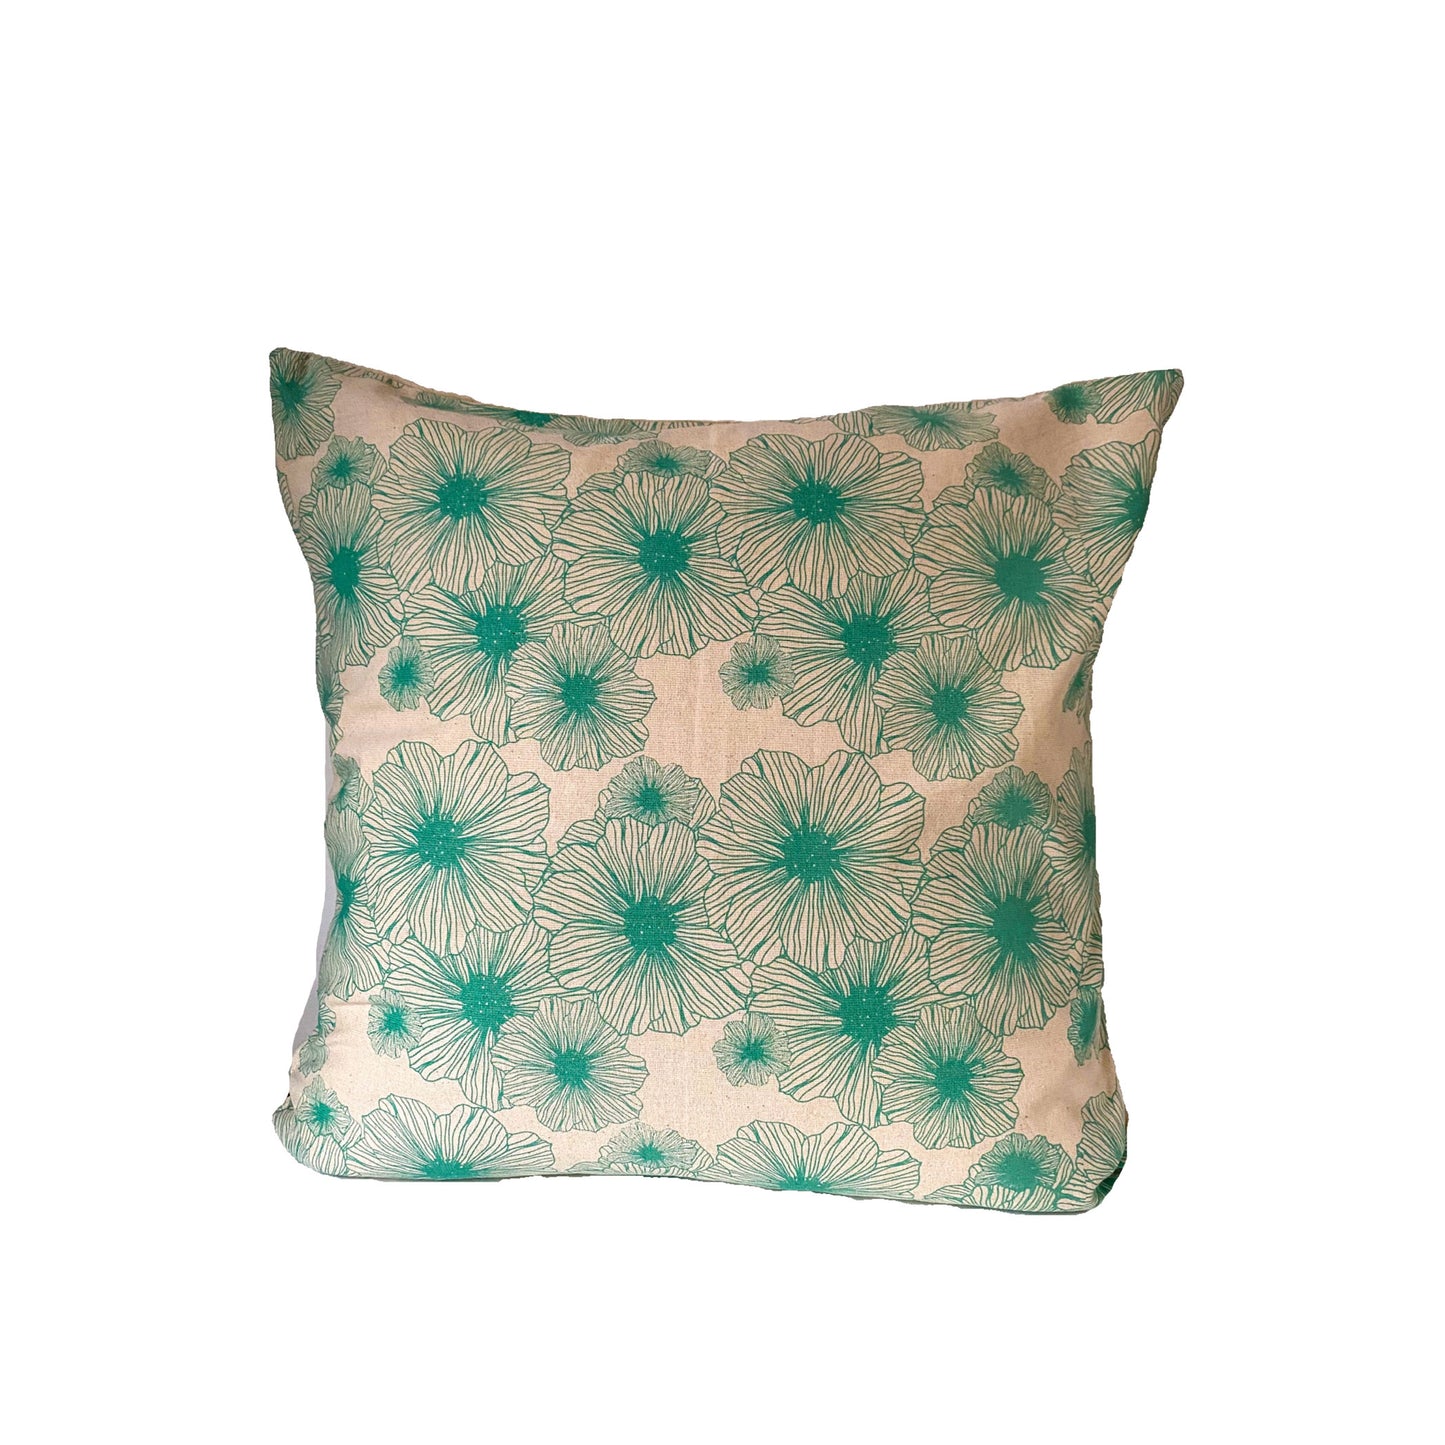 Stella Decor cushion cover with design poppy flower in size 50x50 cm in color turquoise original